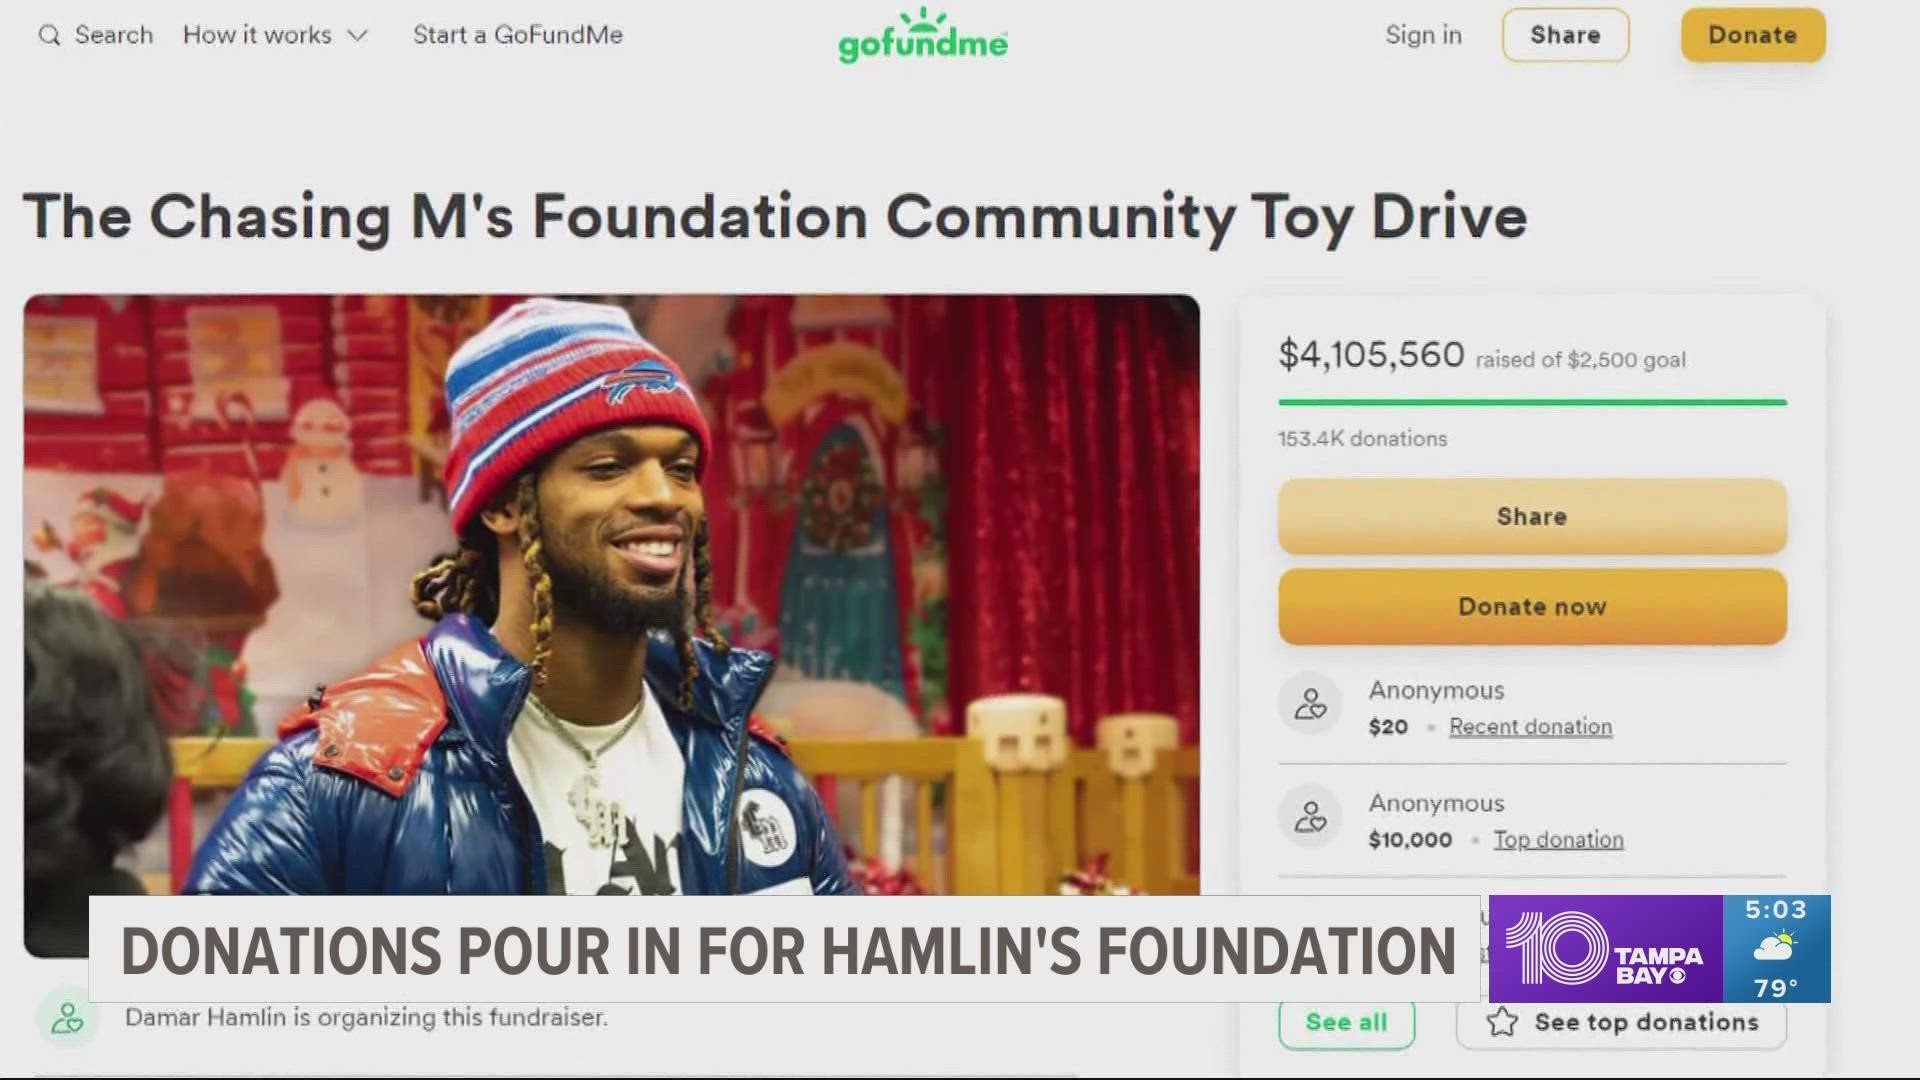 Within an hour of Damar Hamlin collapsing on the field during Monday's Bills games, fans donated to Hamlin's charity.